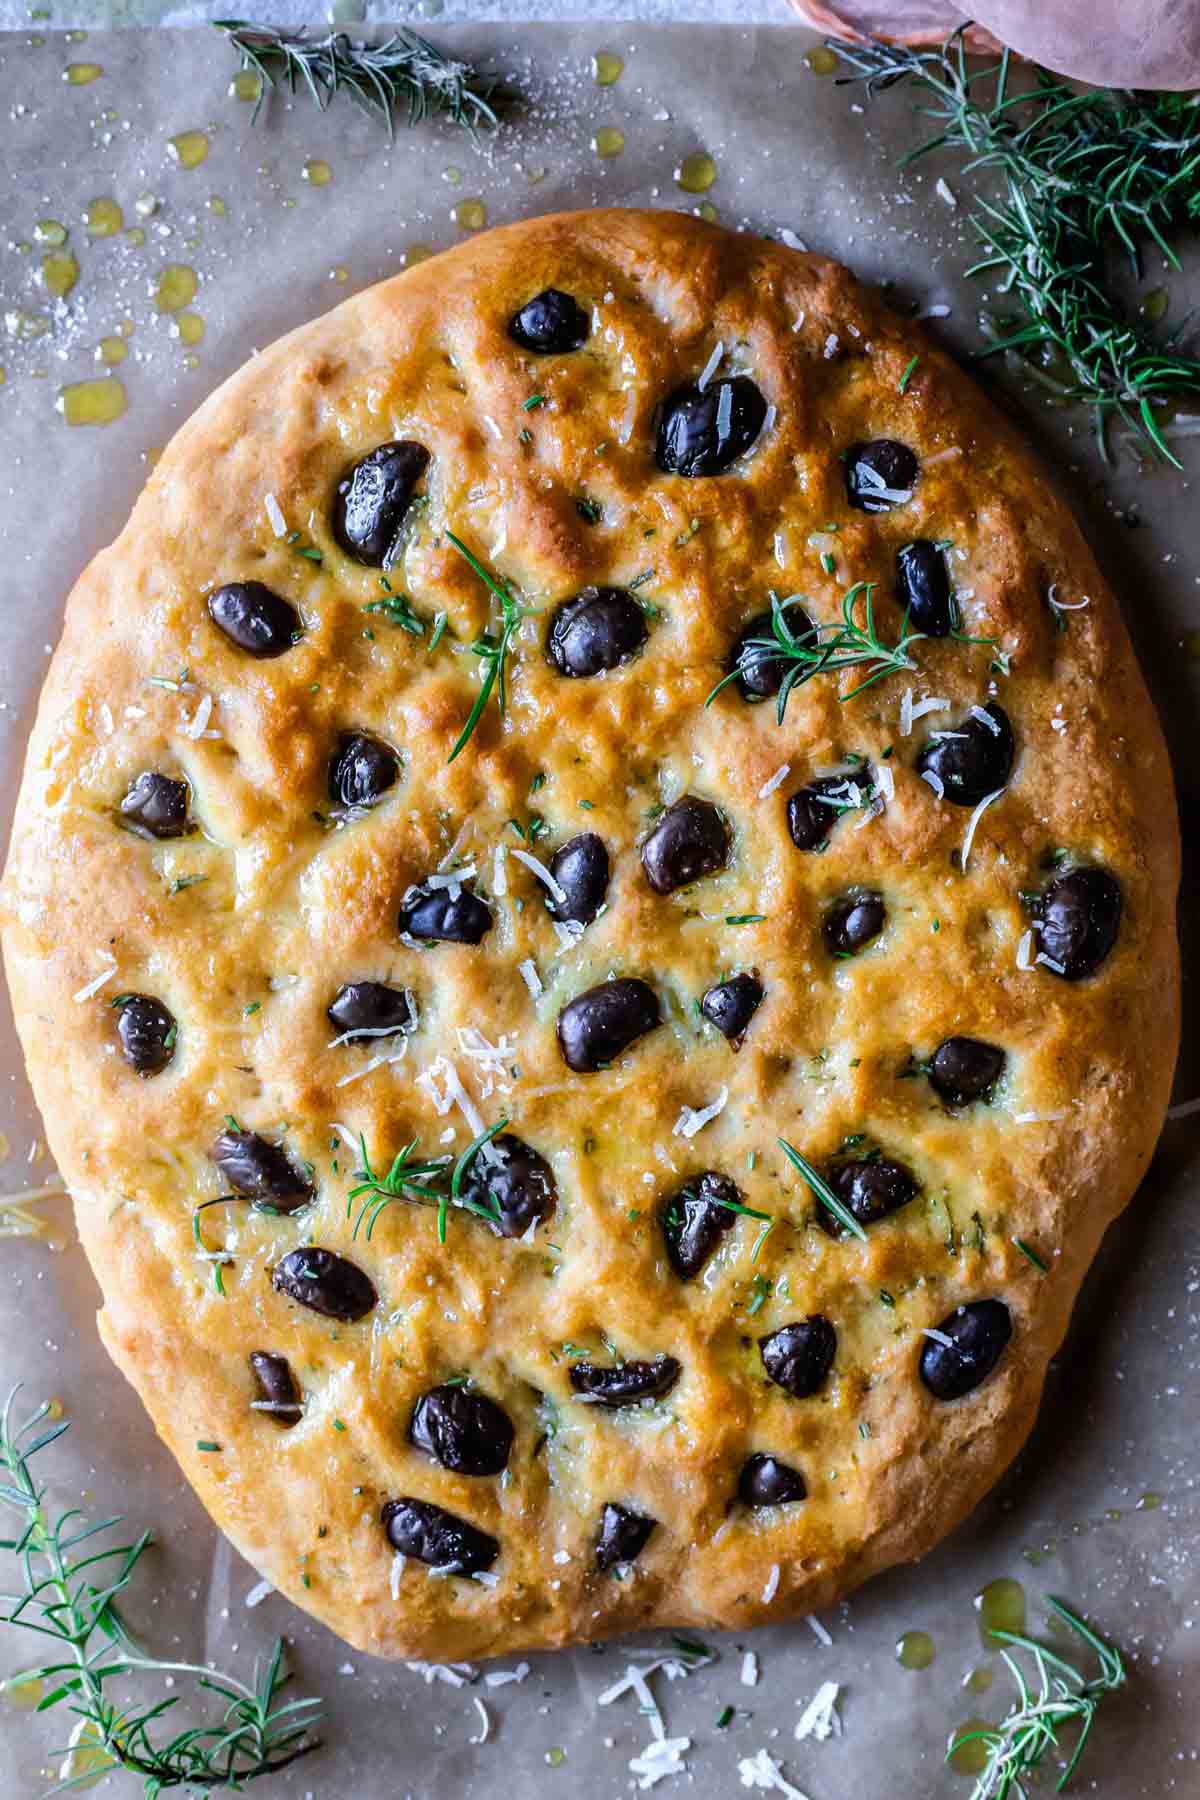 Baked focaccia topped with olives, rosemary and parmesan cheese. 